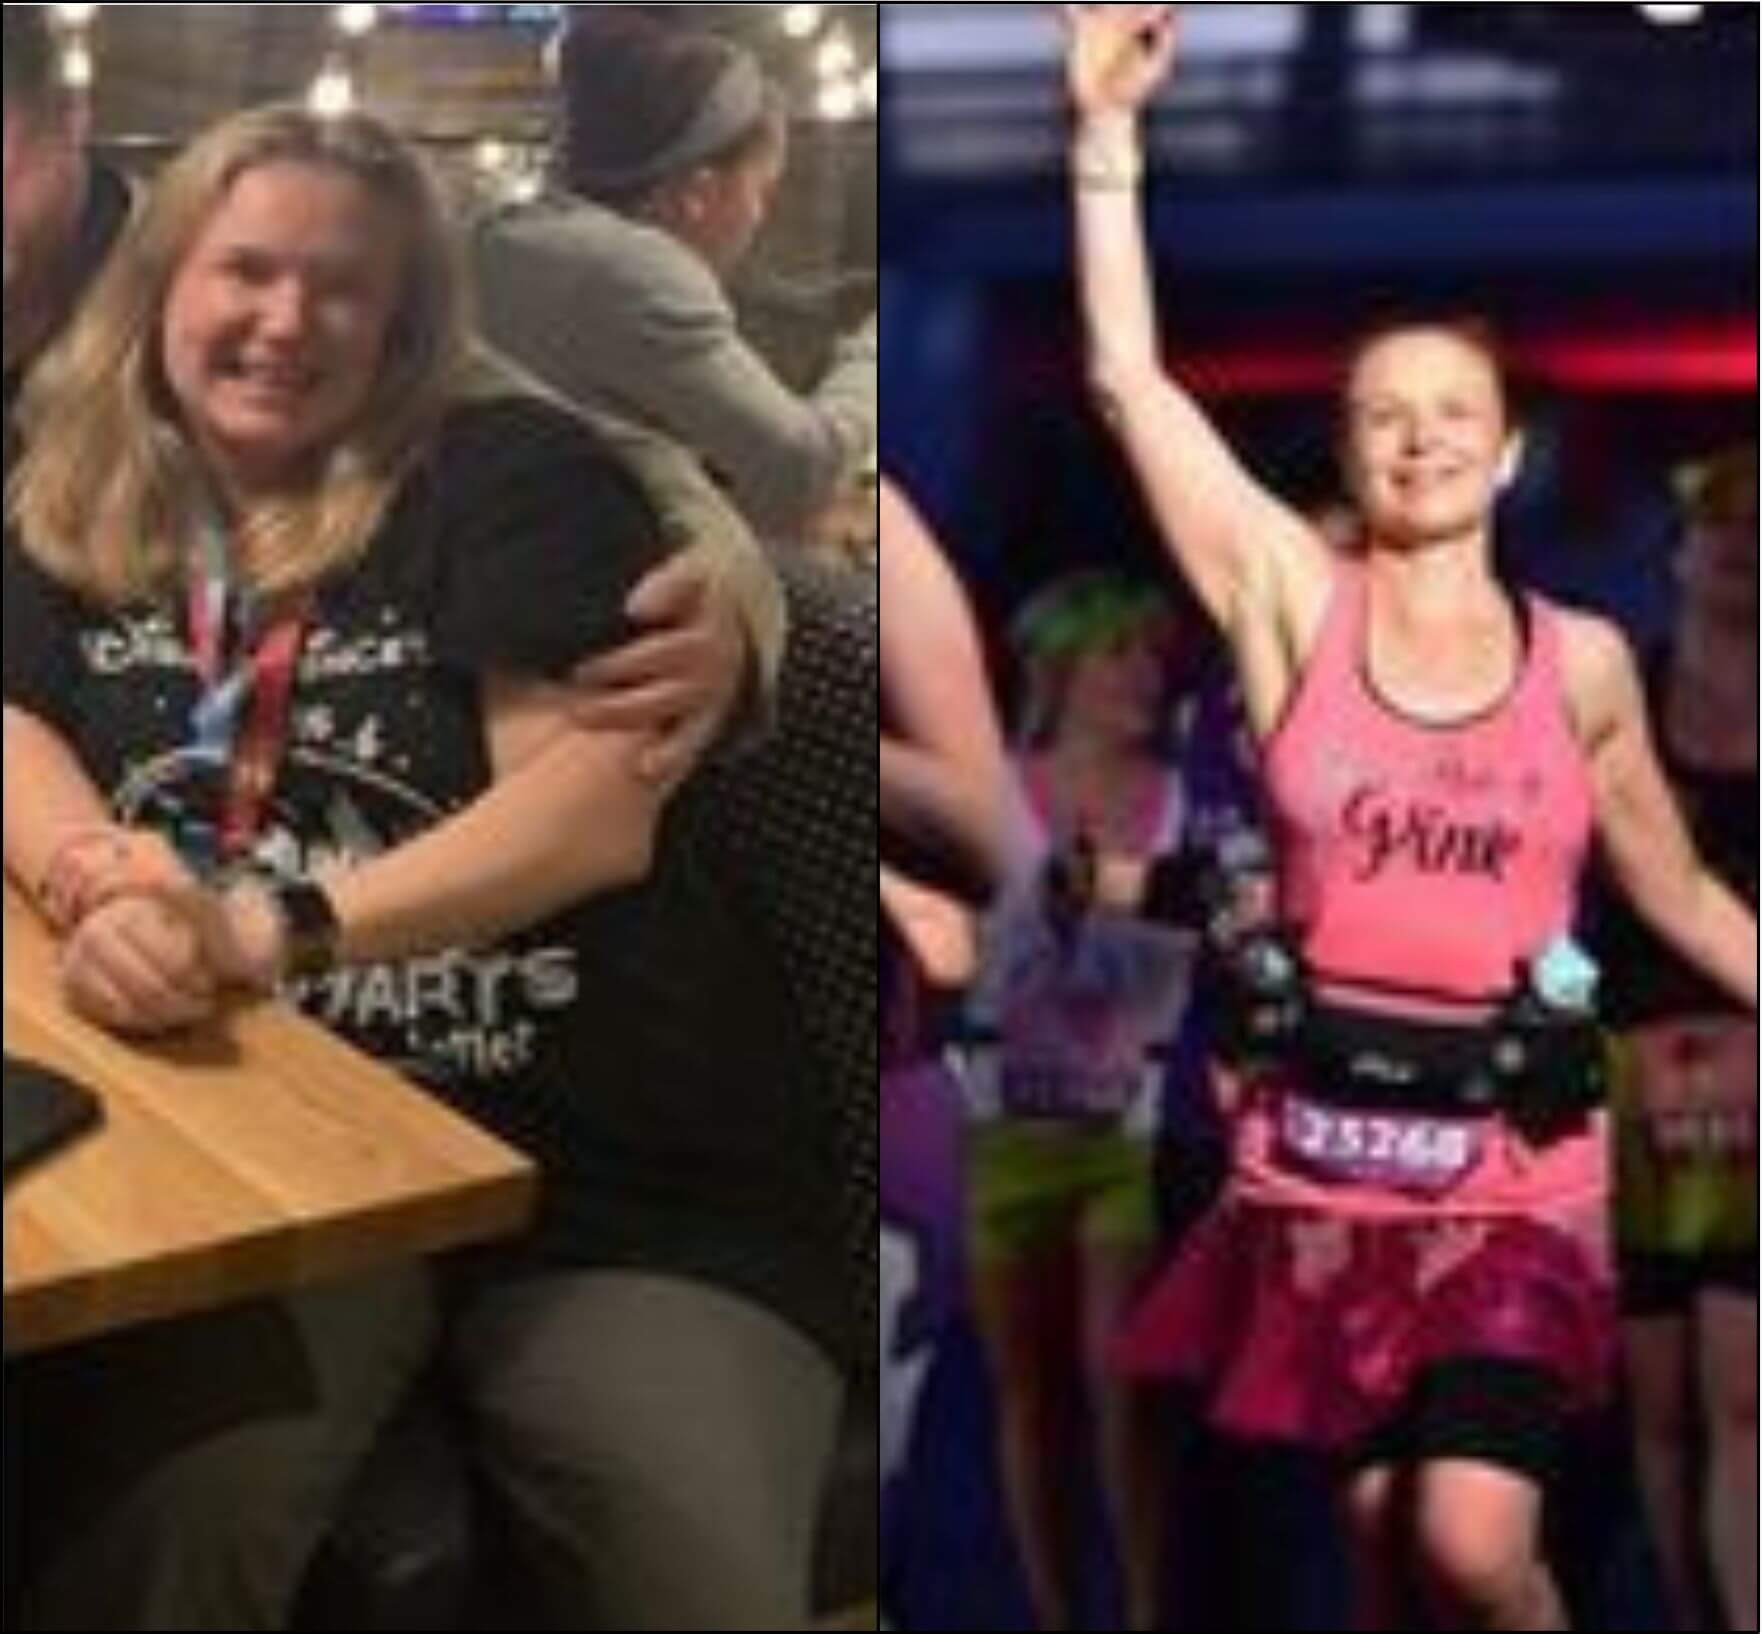 Two pictures of a woman before and after a marathon.